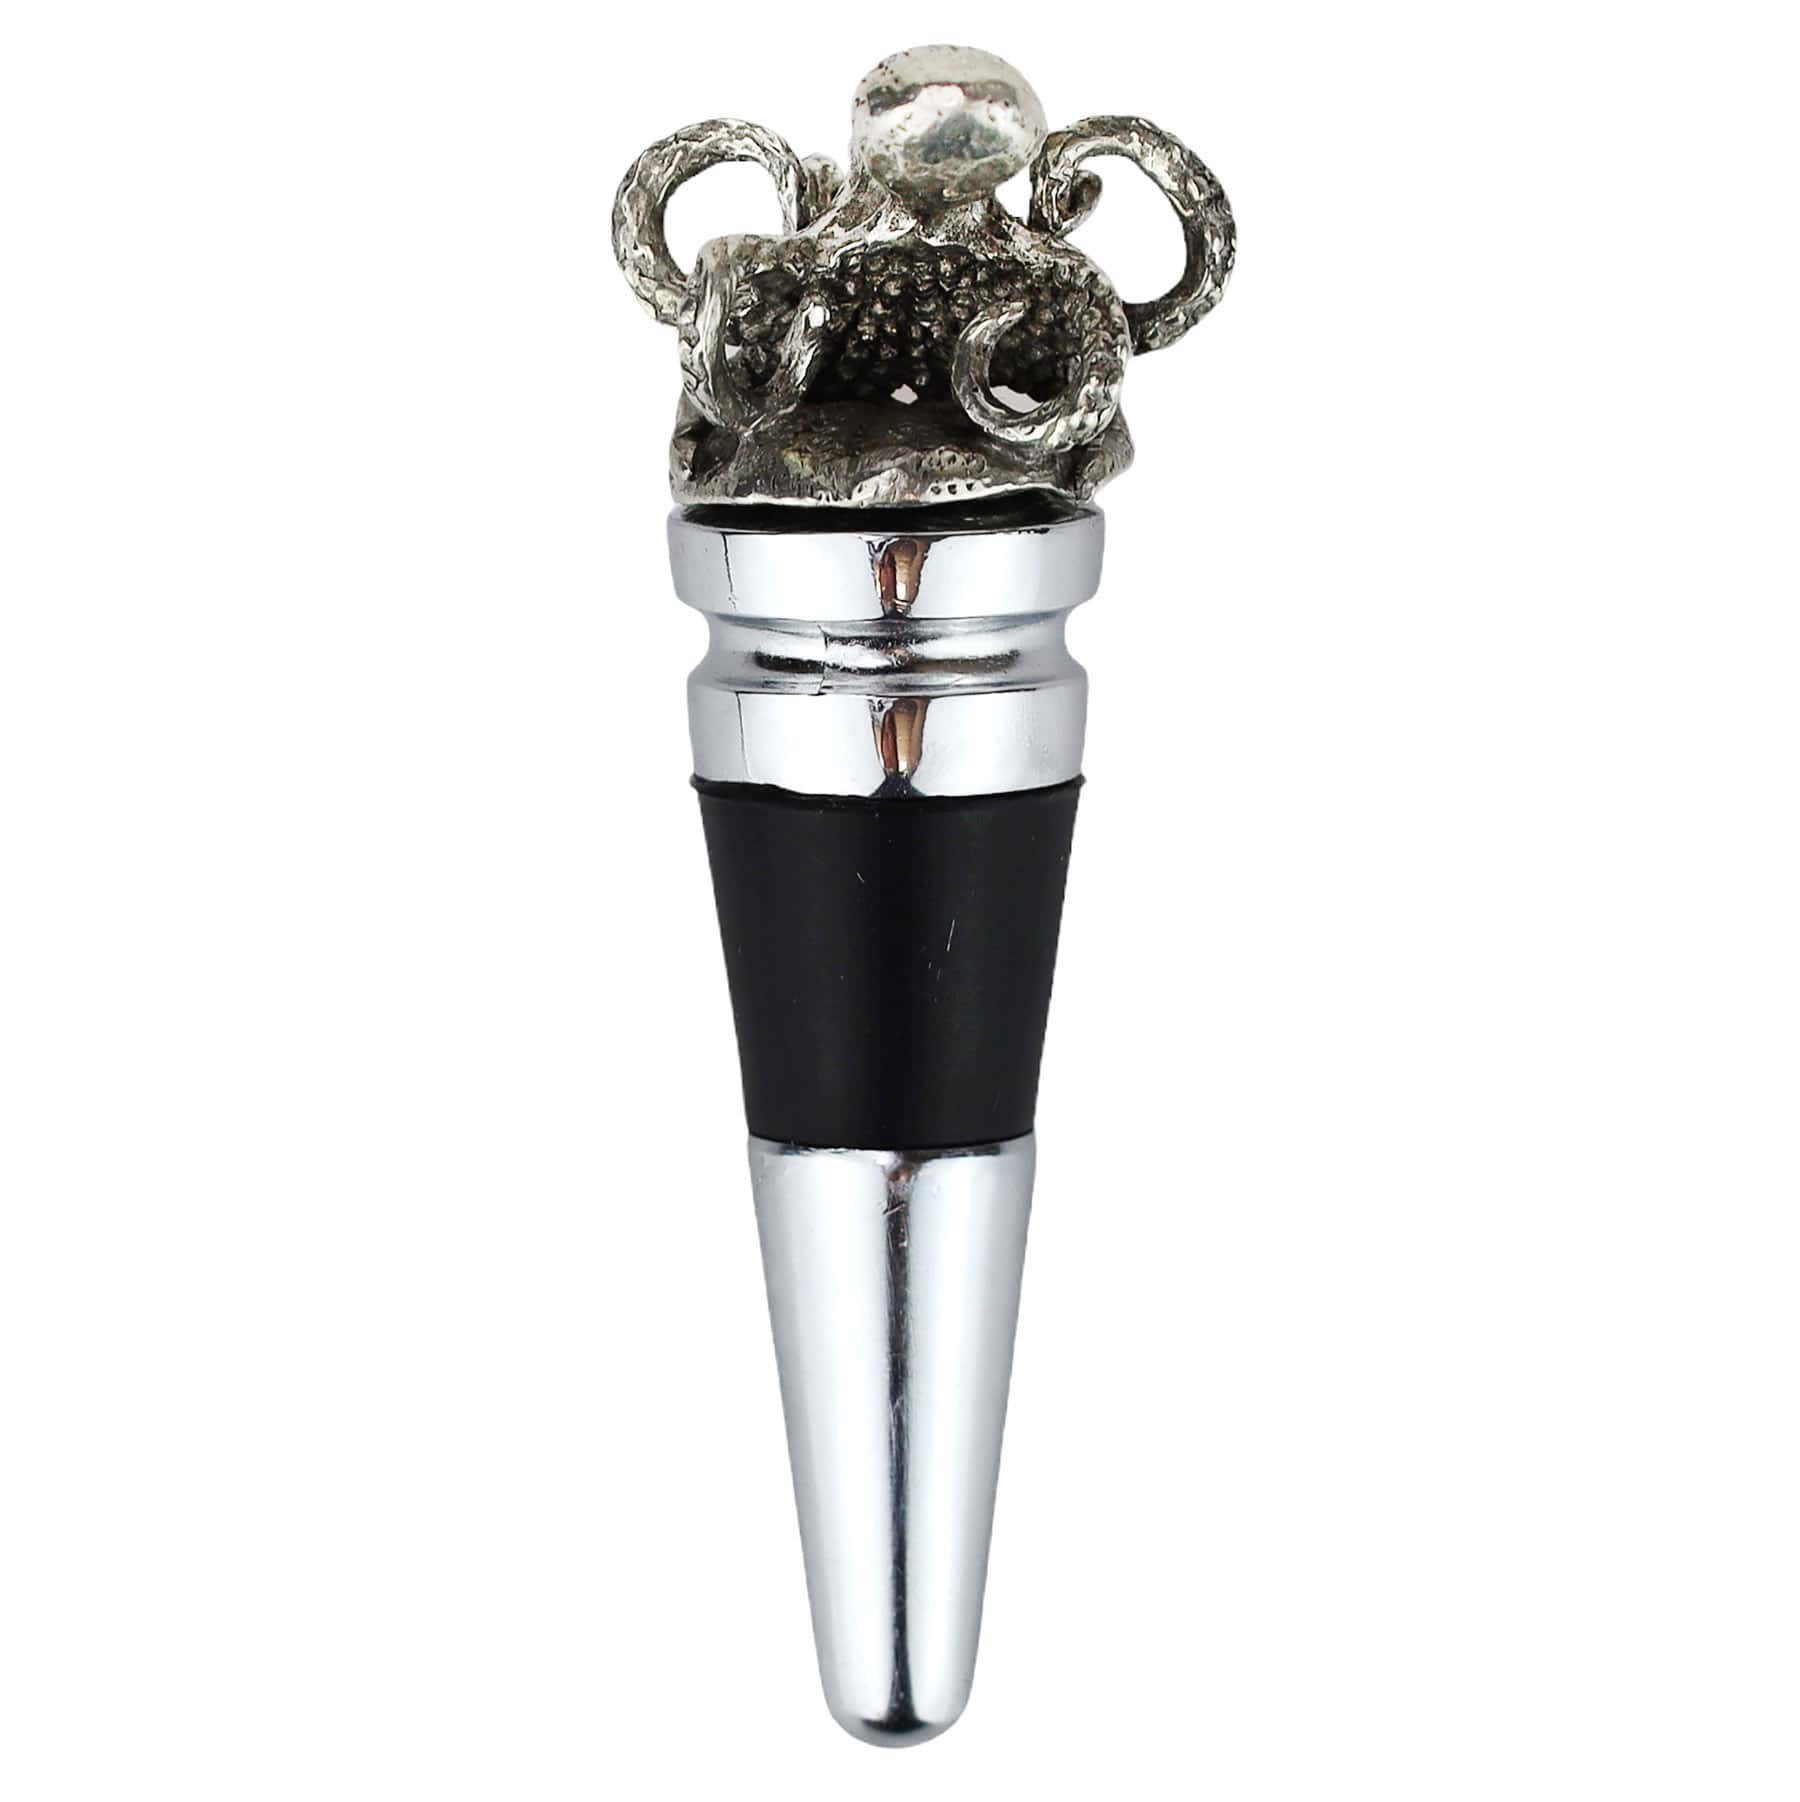 Reverse of Pewter Octopus shaped Bottle Stopper with body spread,showing the metal base